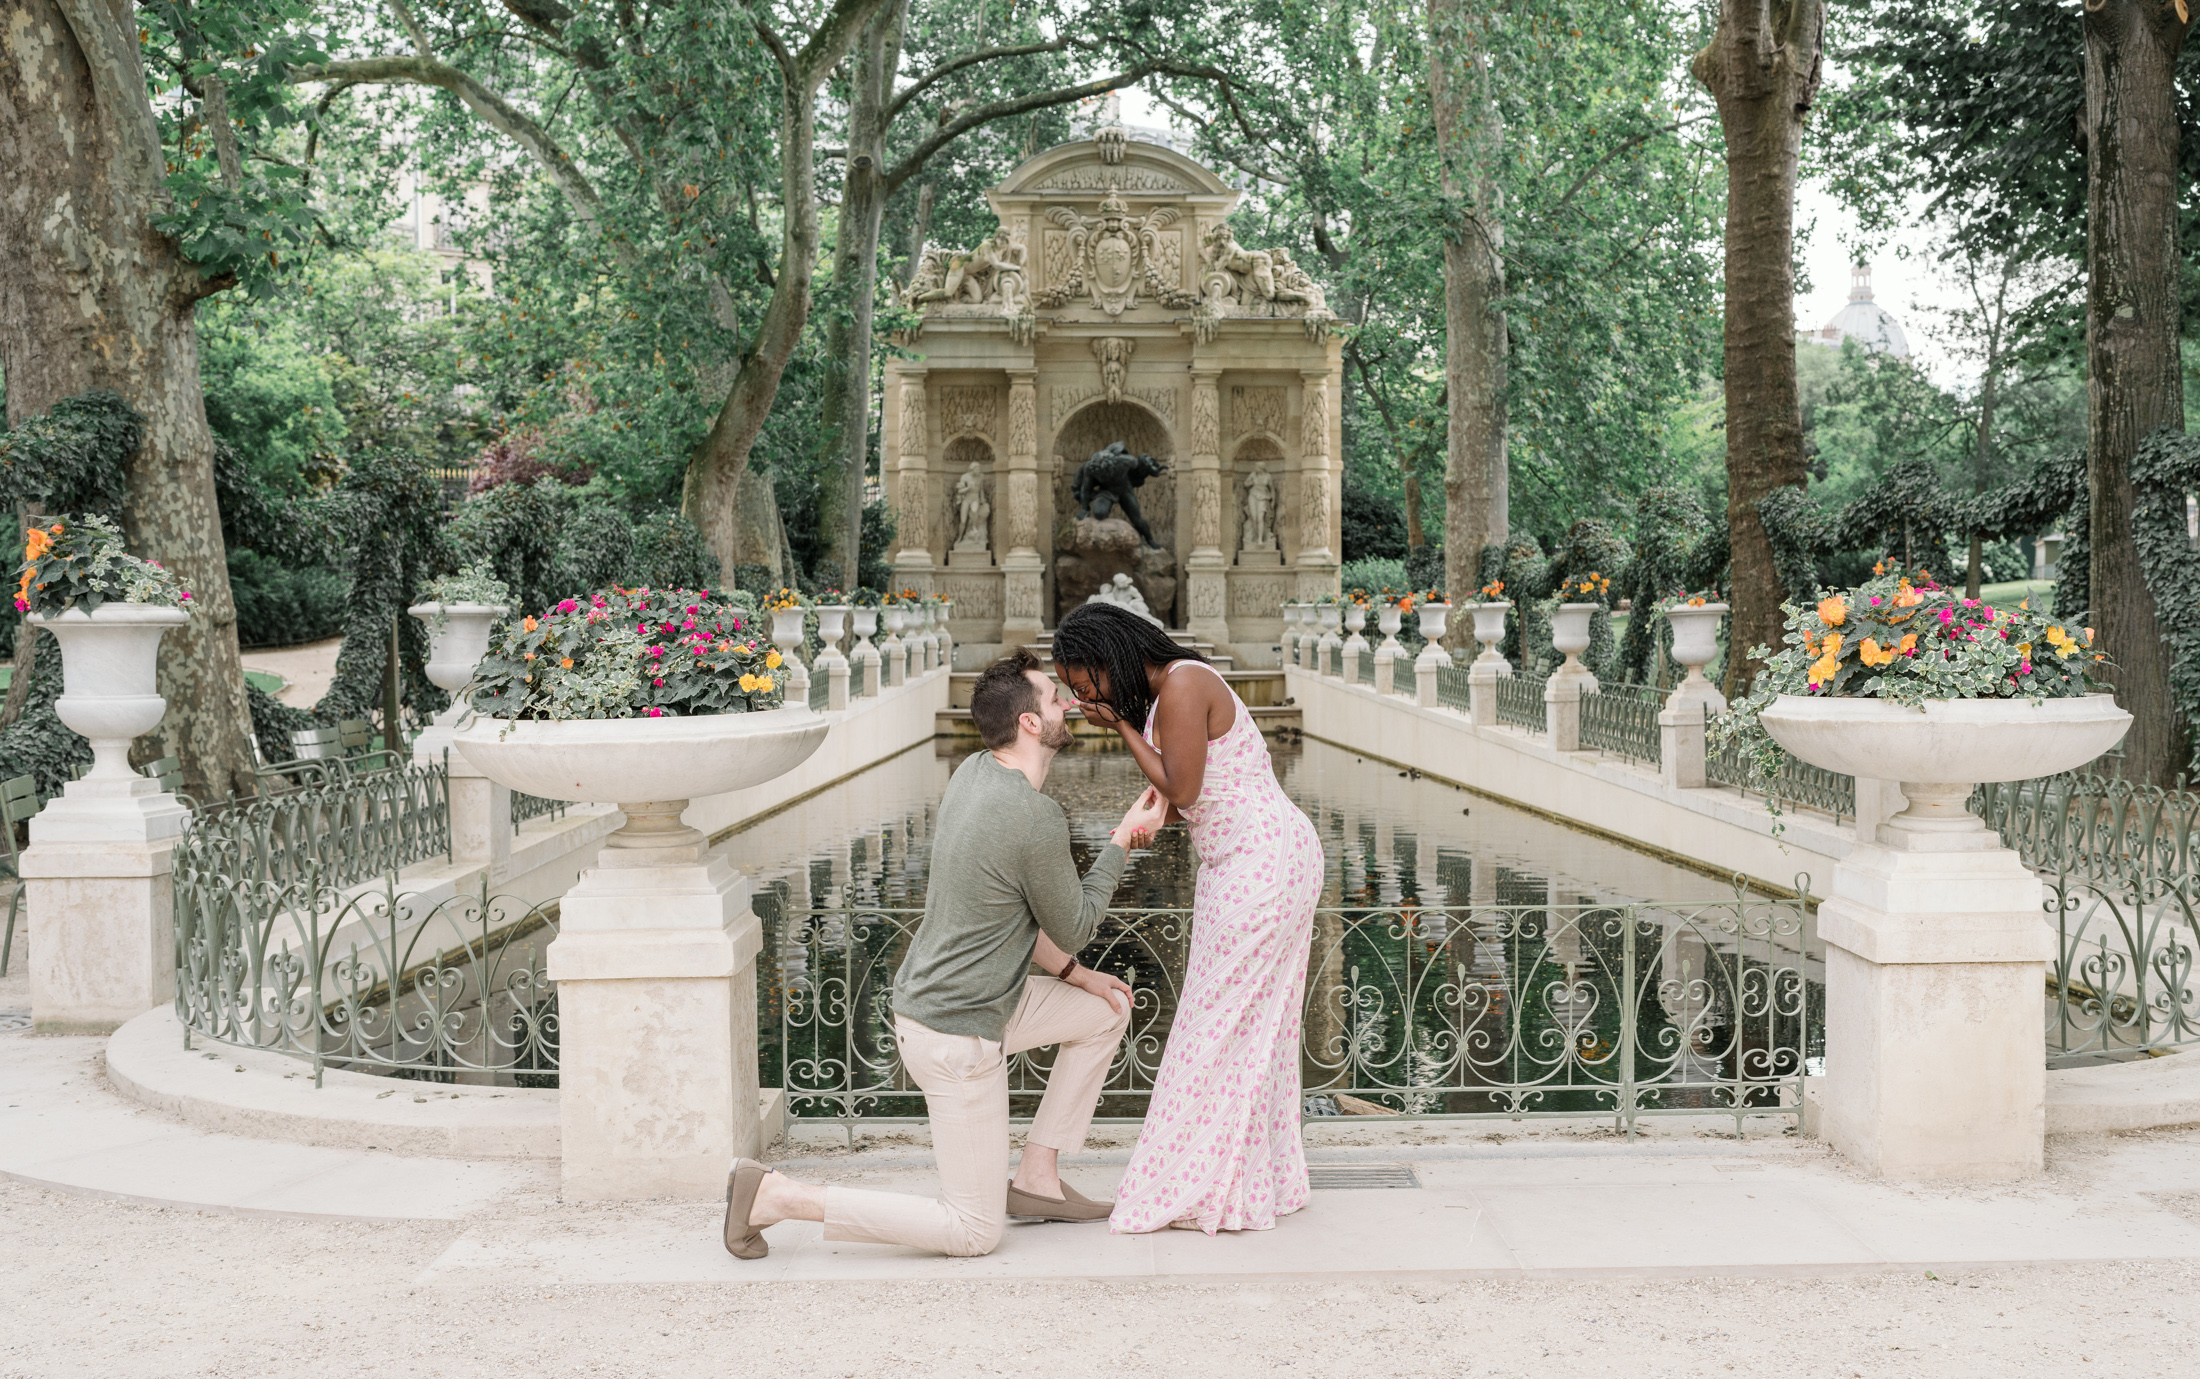 man proposes to woman at medici fountain in luxembourg gardens paris